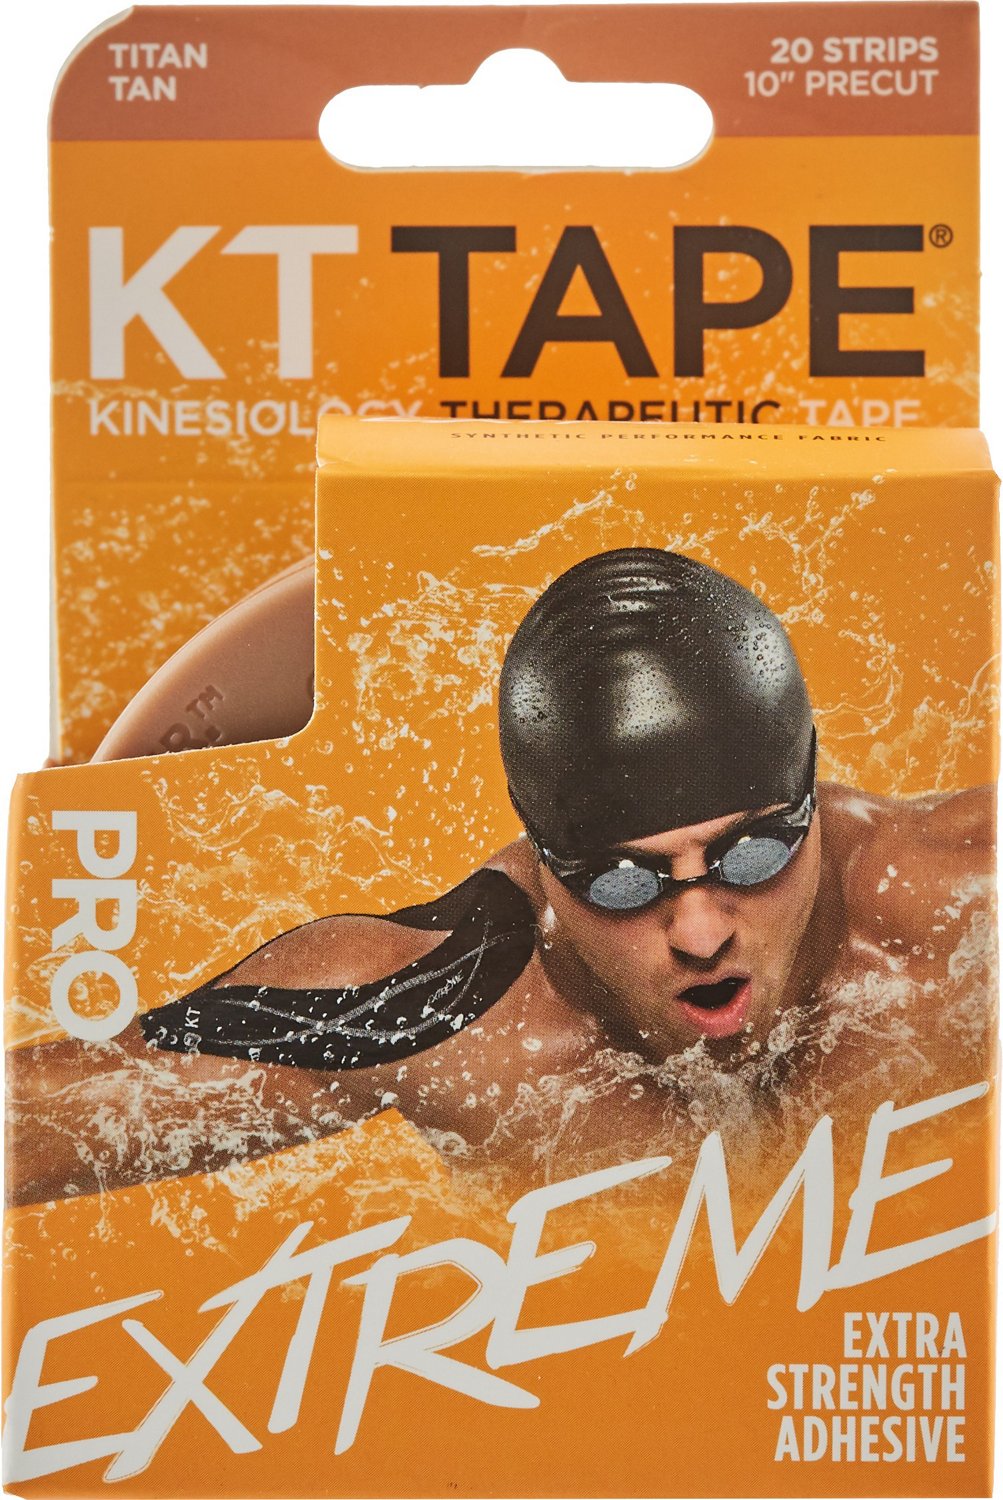 KT Tape Pro Extreme Precut Strips 20-Pack